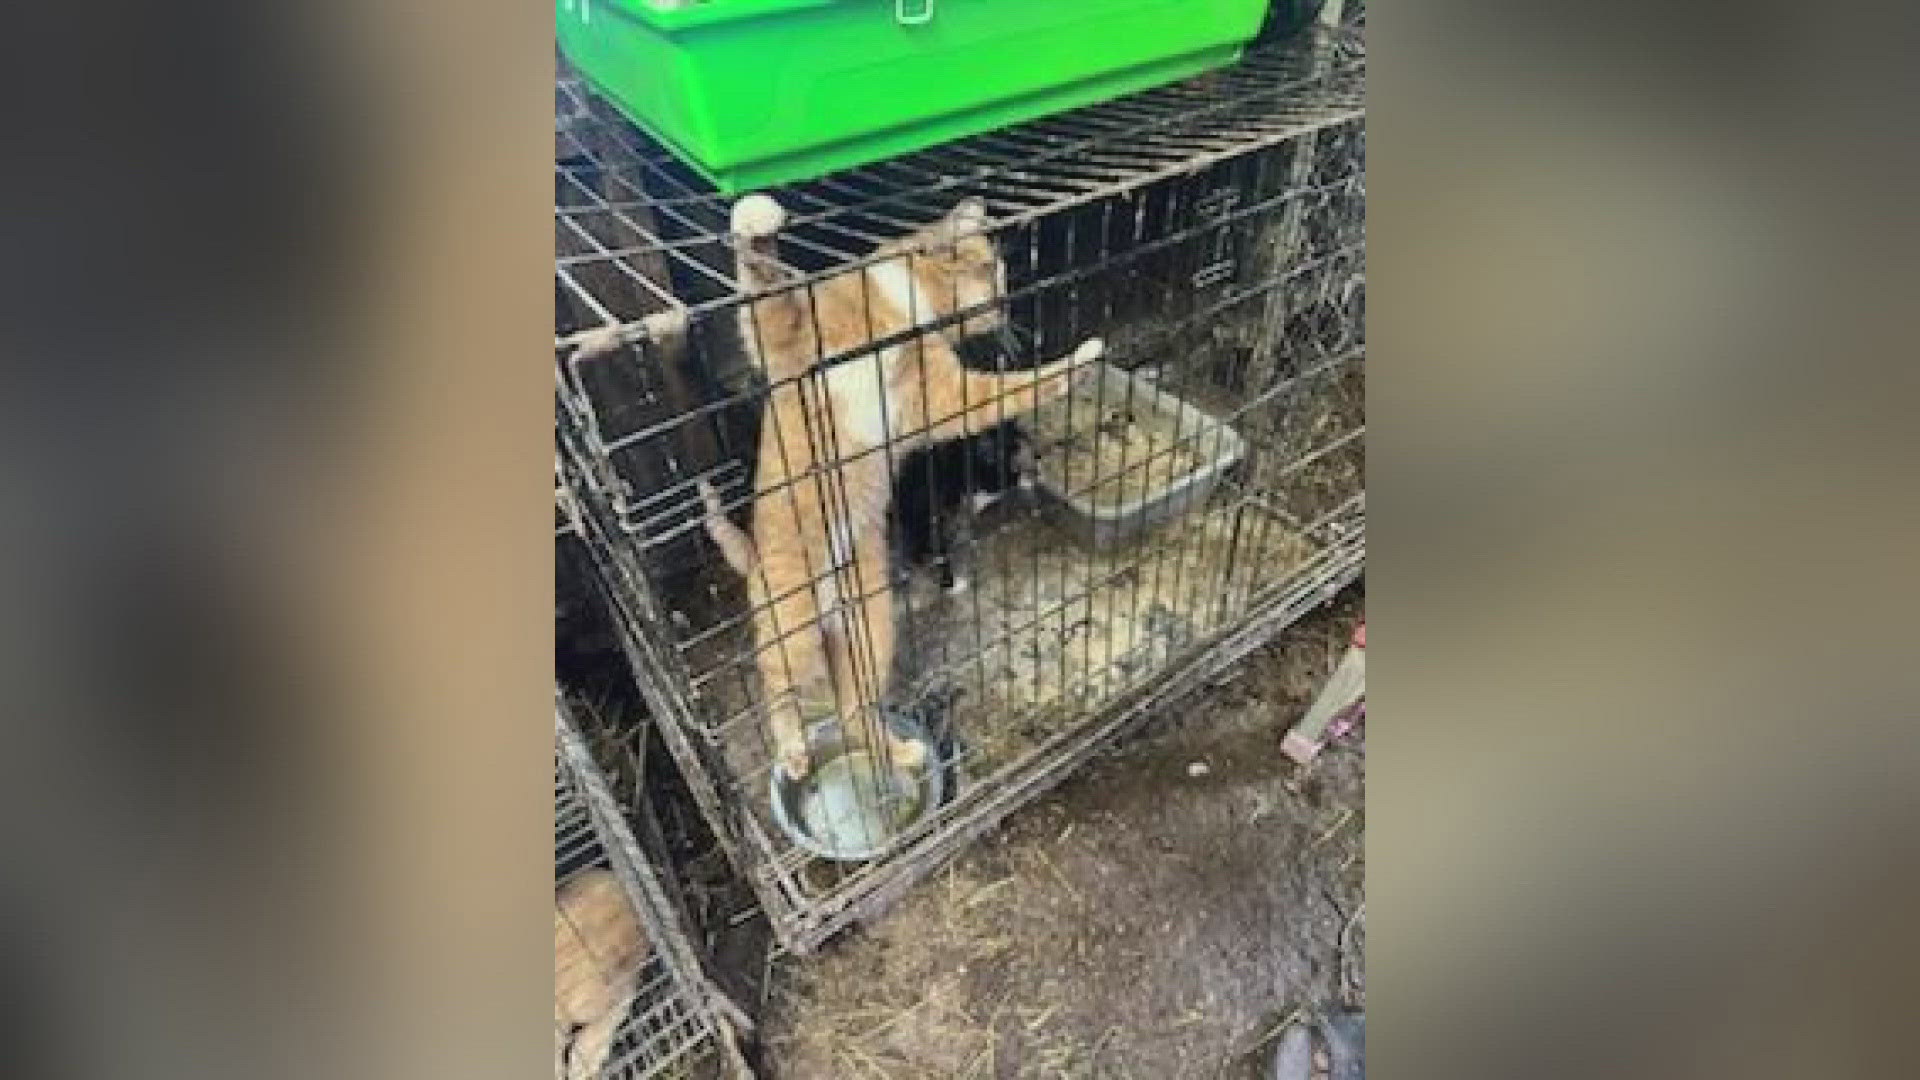 The Portage Animal Protective League is asking for donations to help with the 'extraordinary' care costs for the rescued animals.